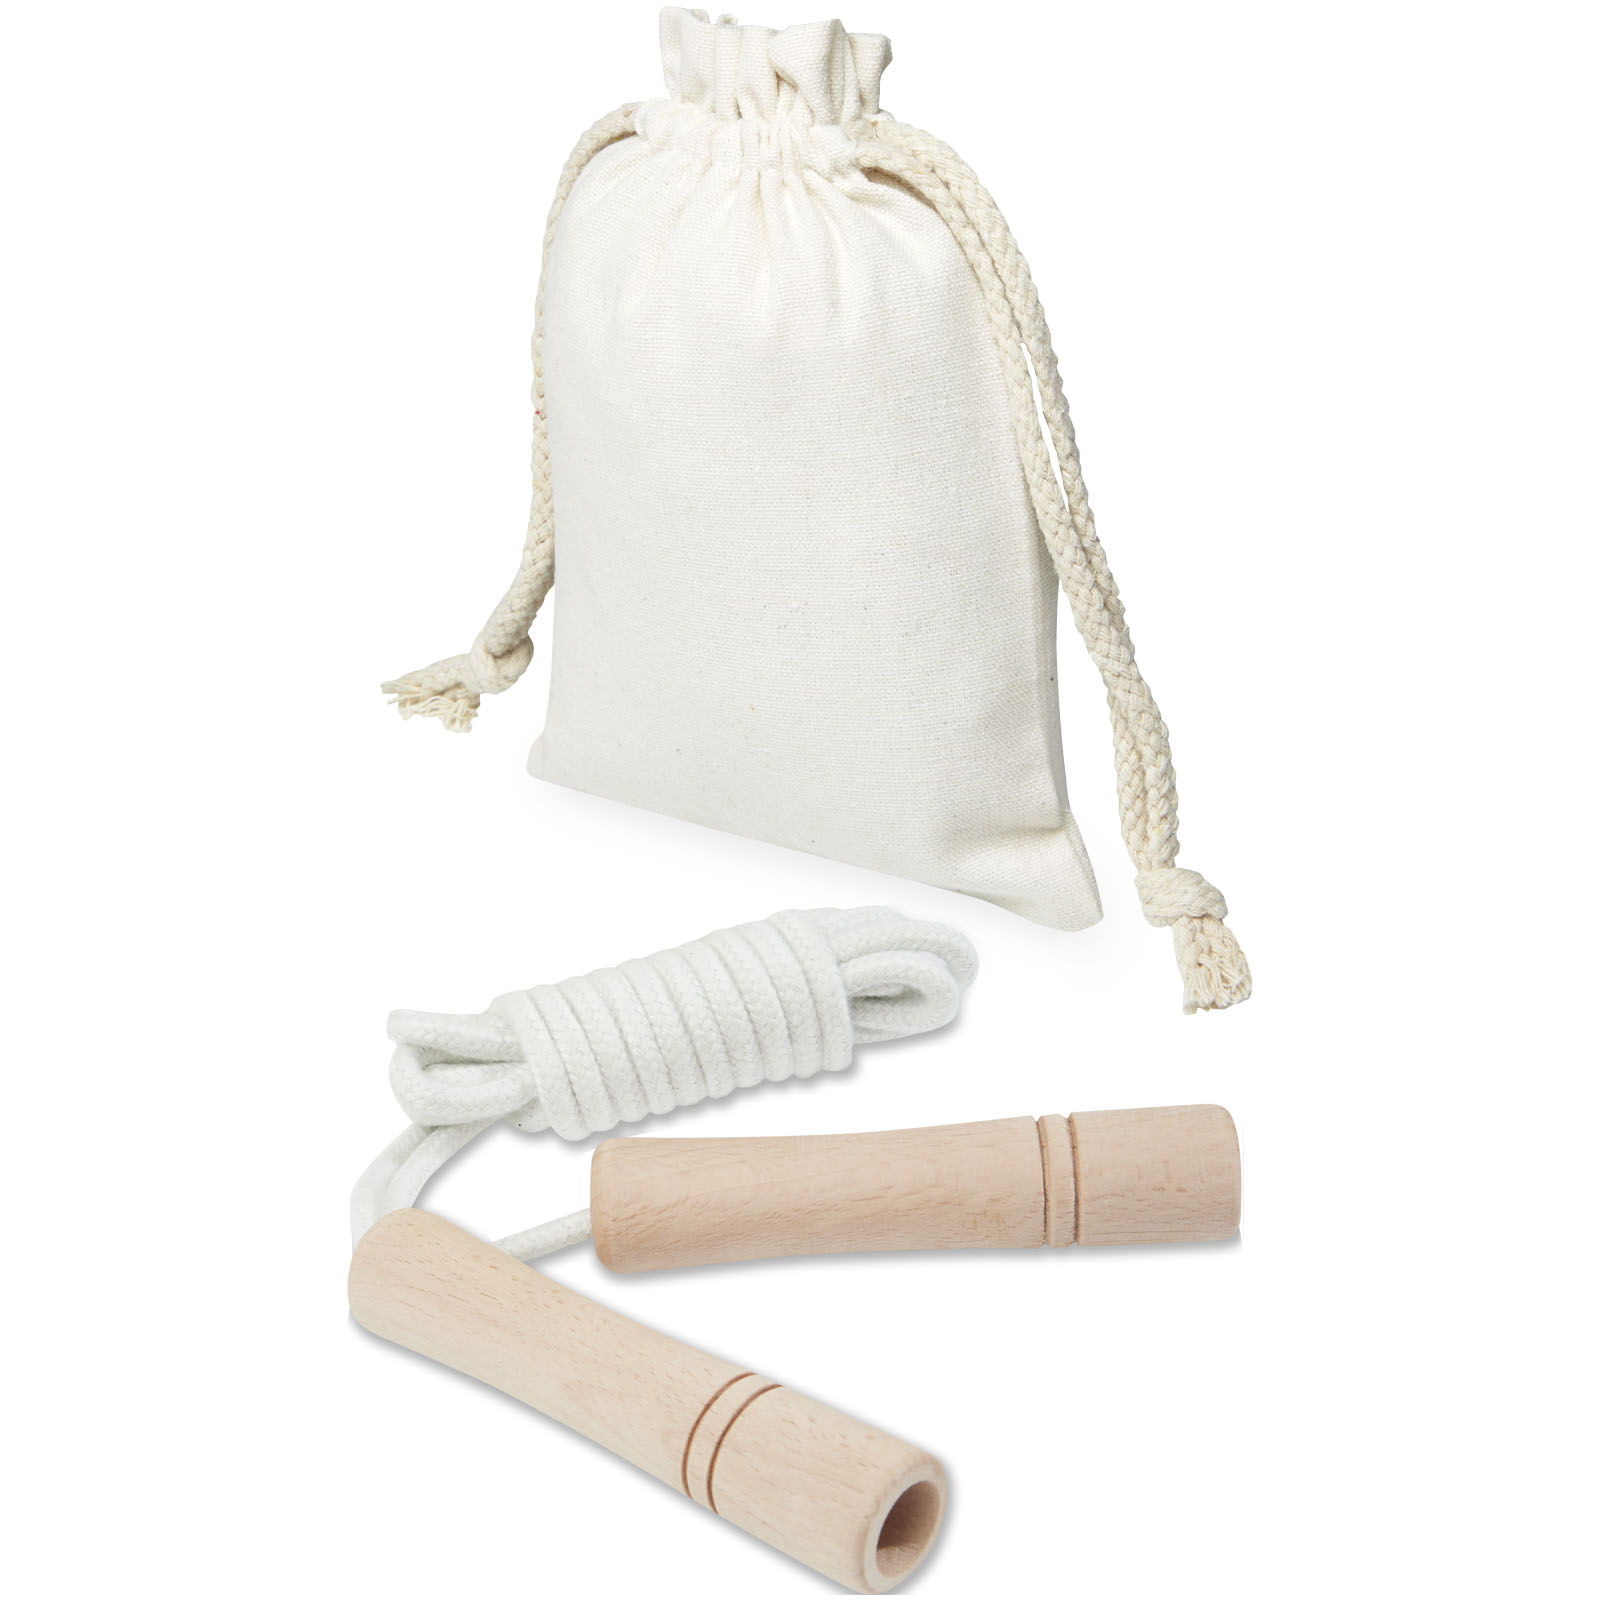 Fitness & Sport - Denise wooden skipping rope in cotton pouch